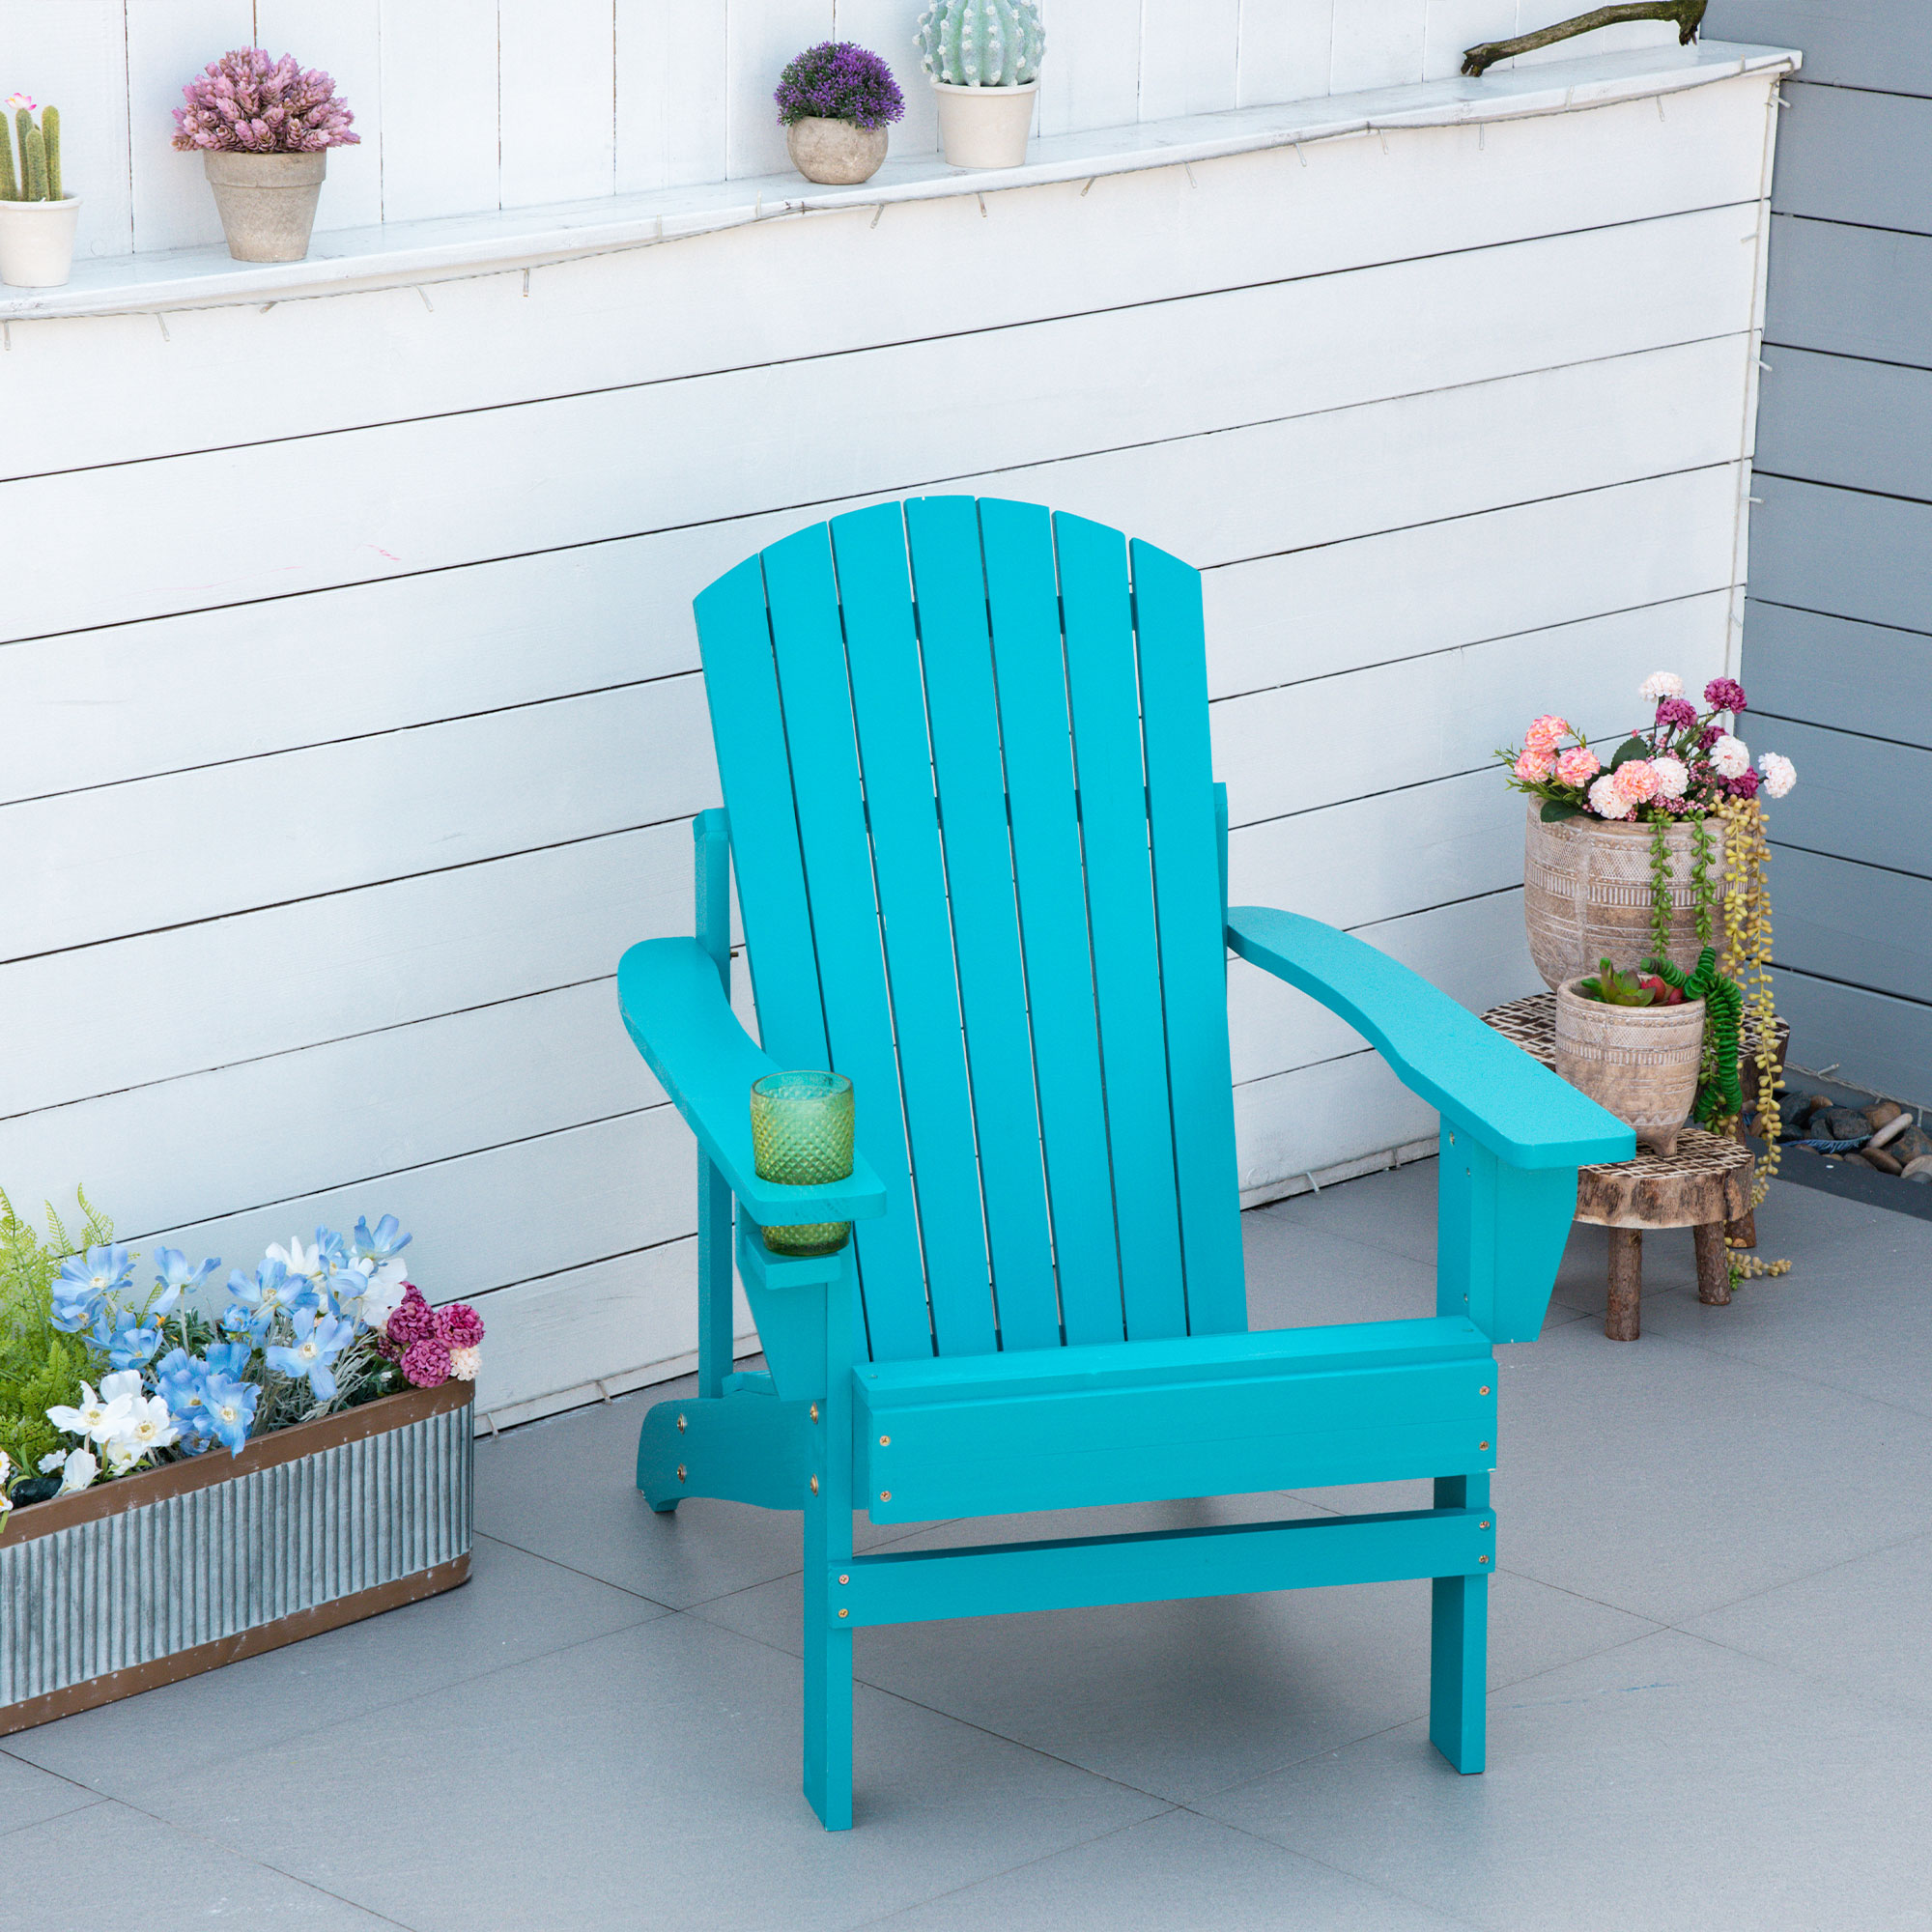 Outsunny Wood Adirondack Chair, Wooden Outdoor & Patio Seating, Sky Blue - image 2 of 9